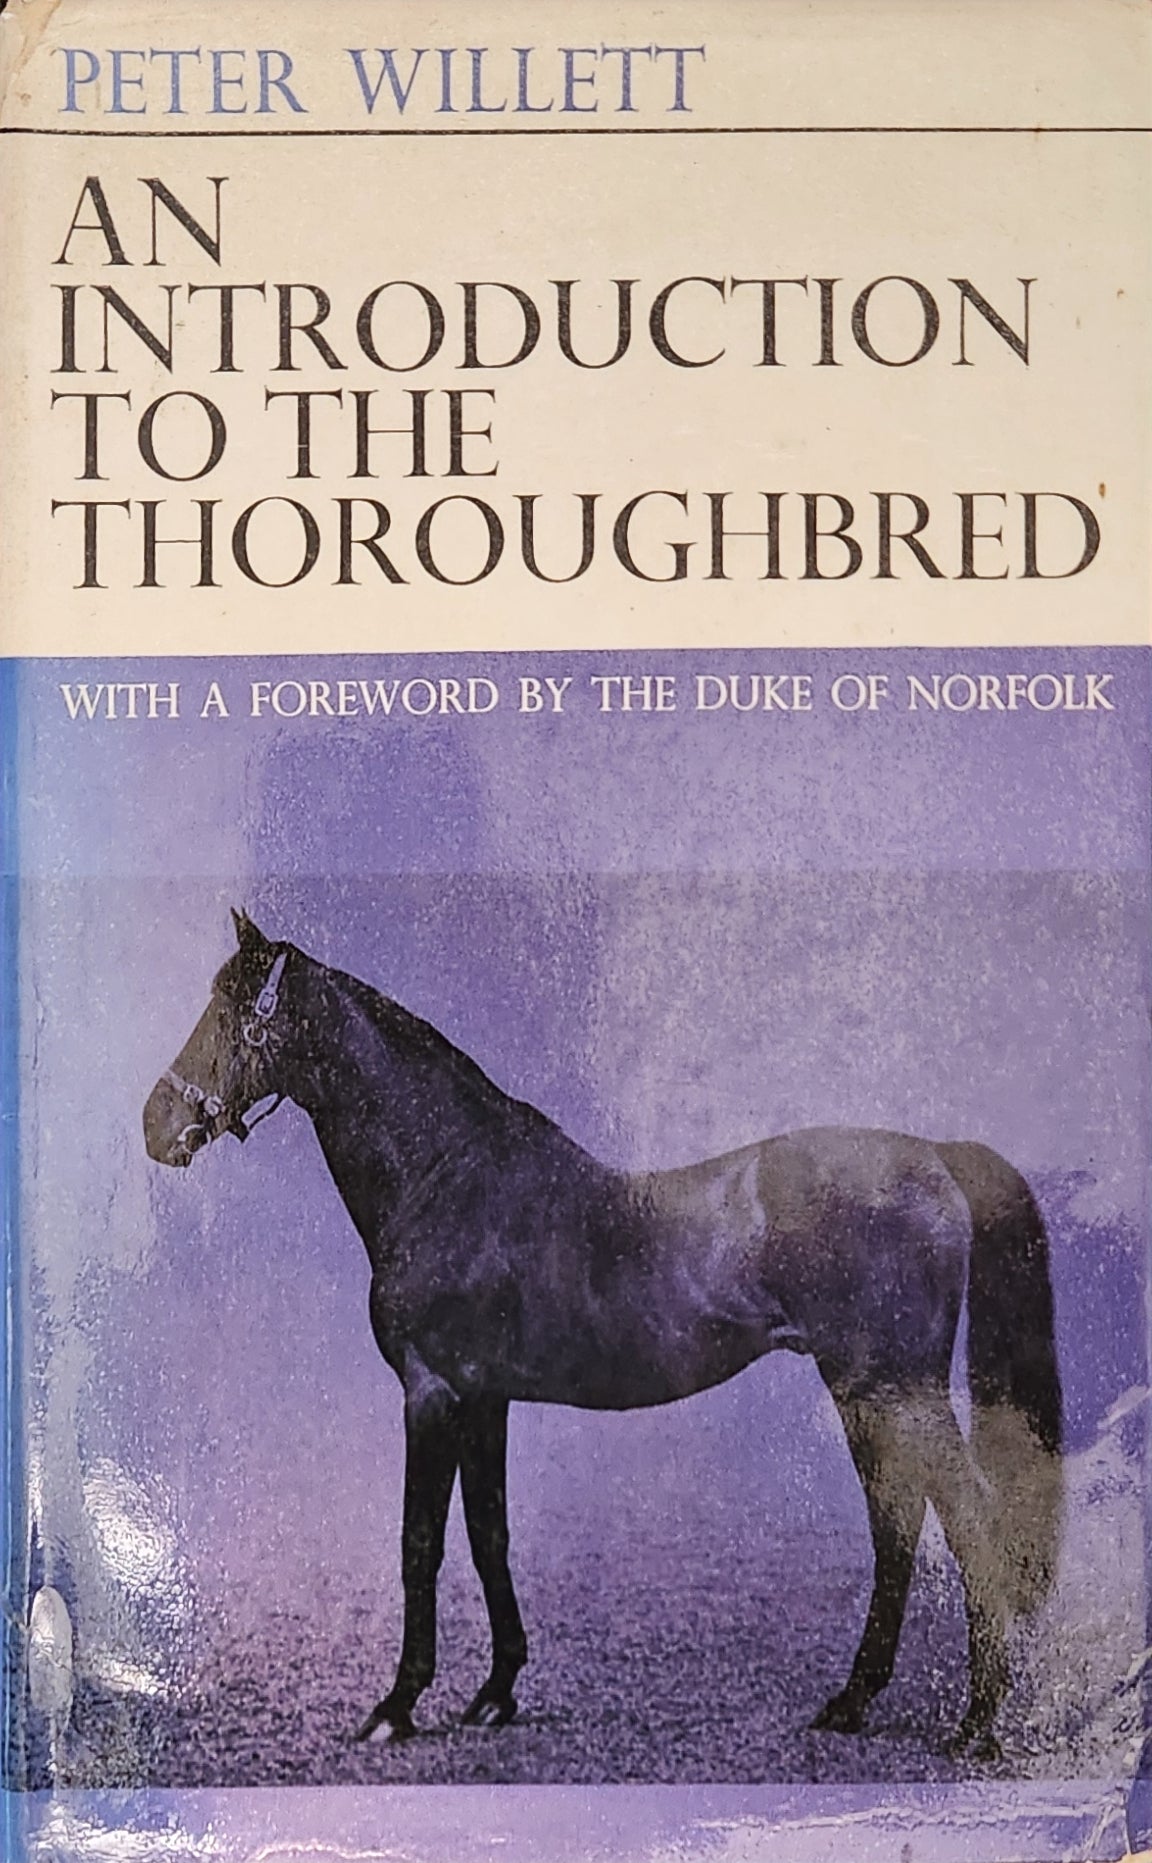 An Introduction to the Thoroughbred